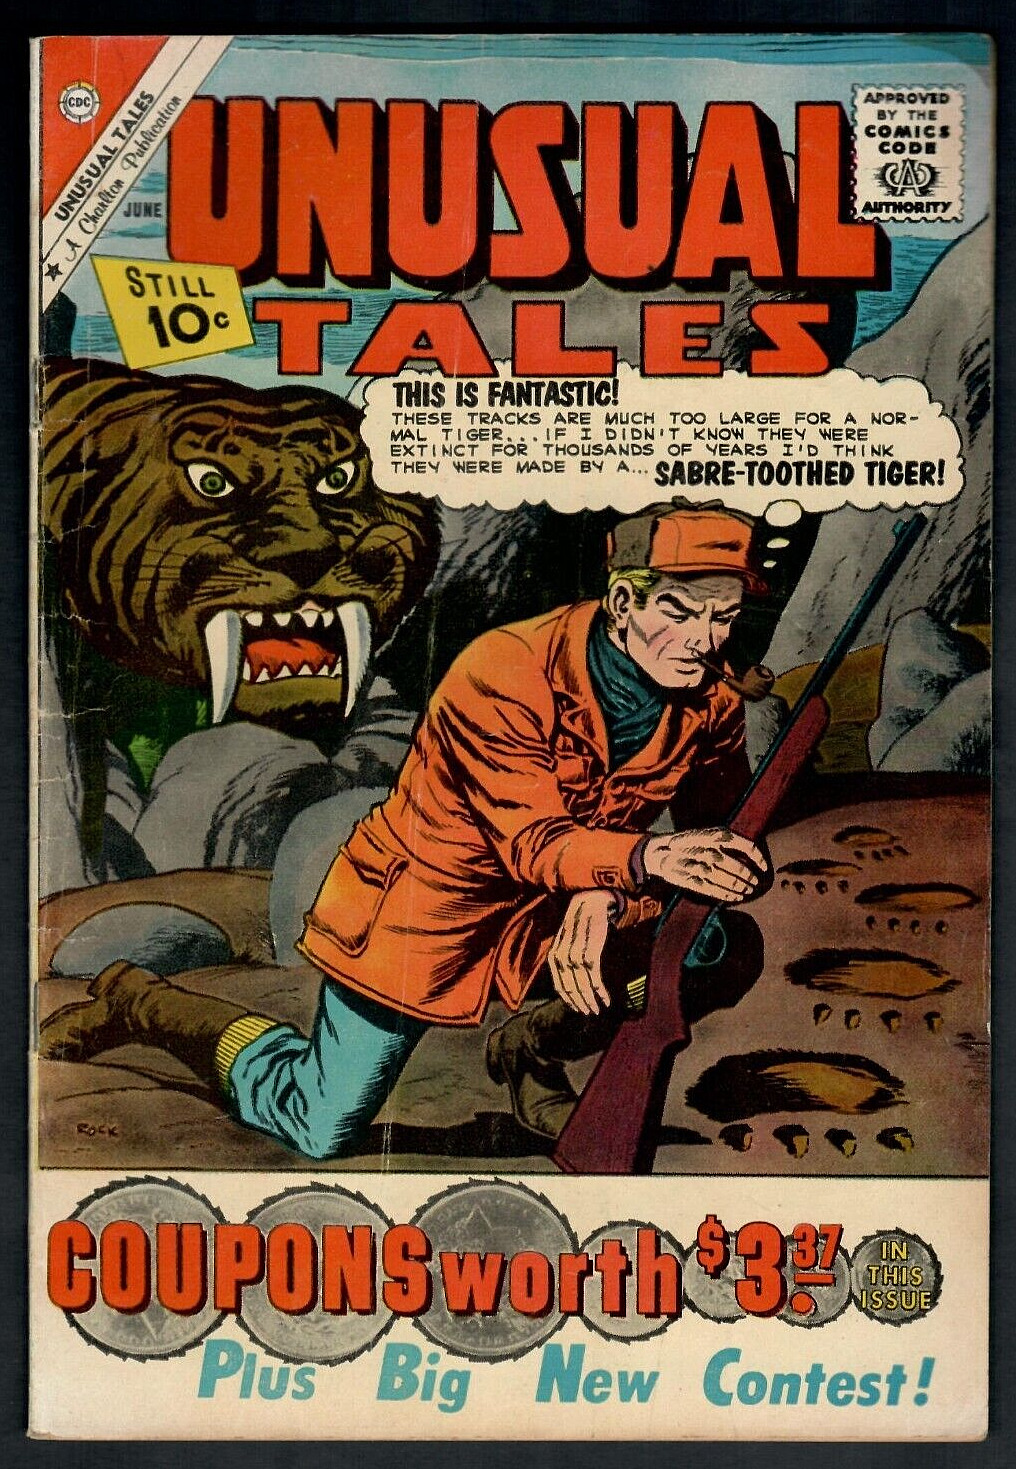 Unusual Tales # 28 (5.0) 6/1961 CDC 10c Early Silver-Age Horror Giant Tiger 🐅